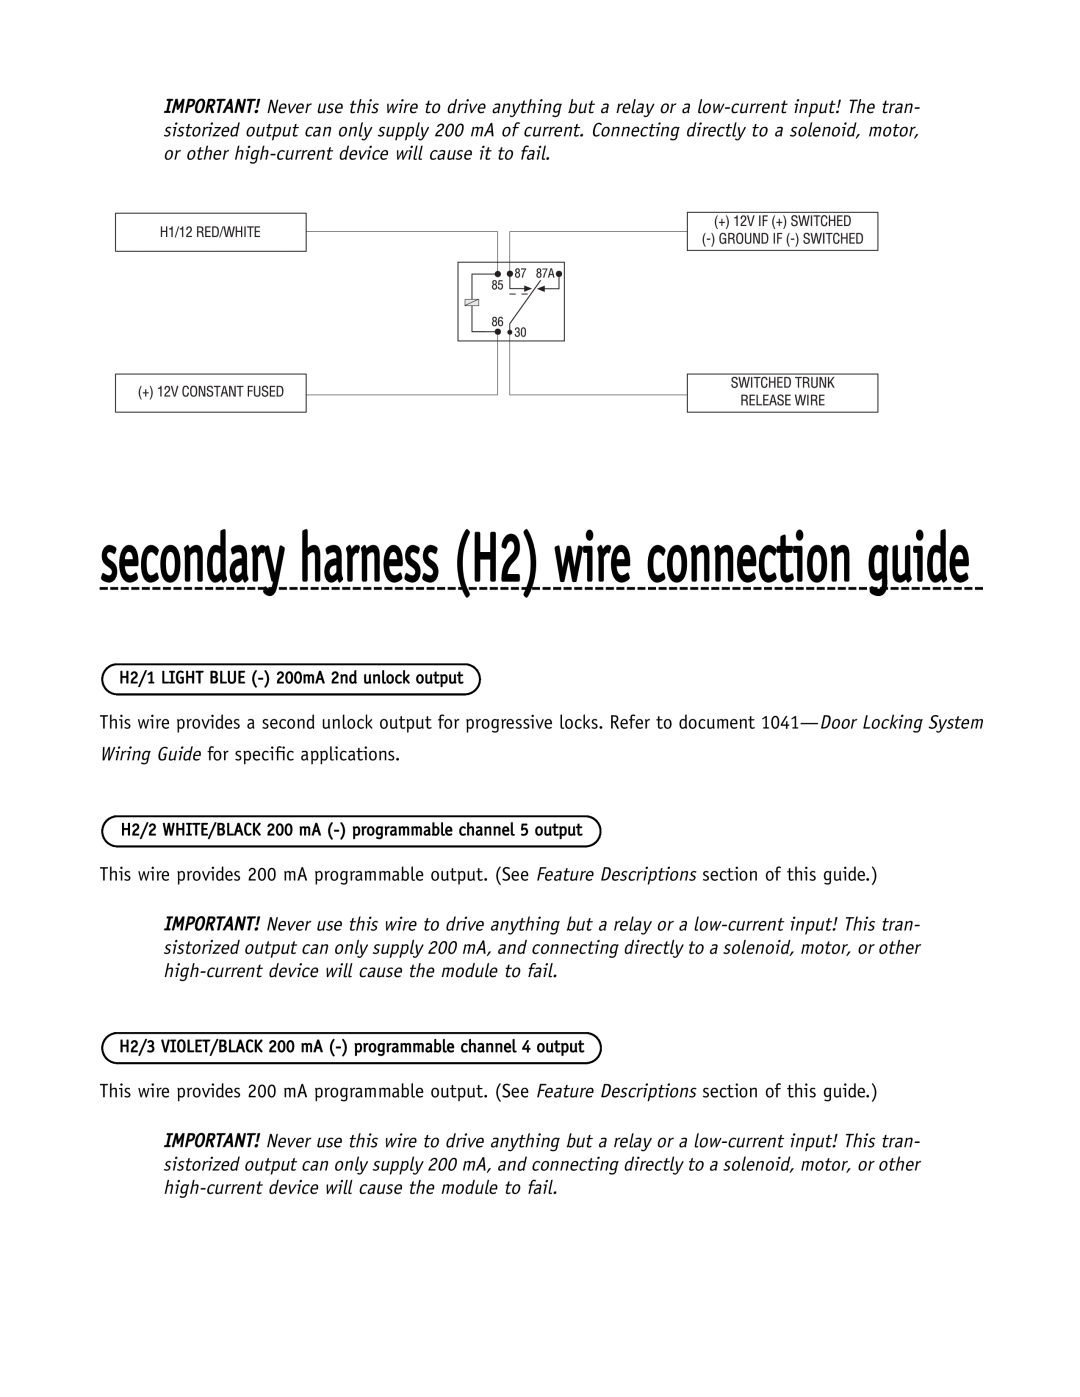 Directed Electronics SR6000 manual secondary harness H2 wire connection guide 